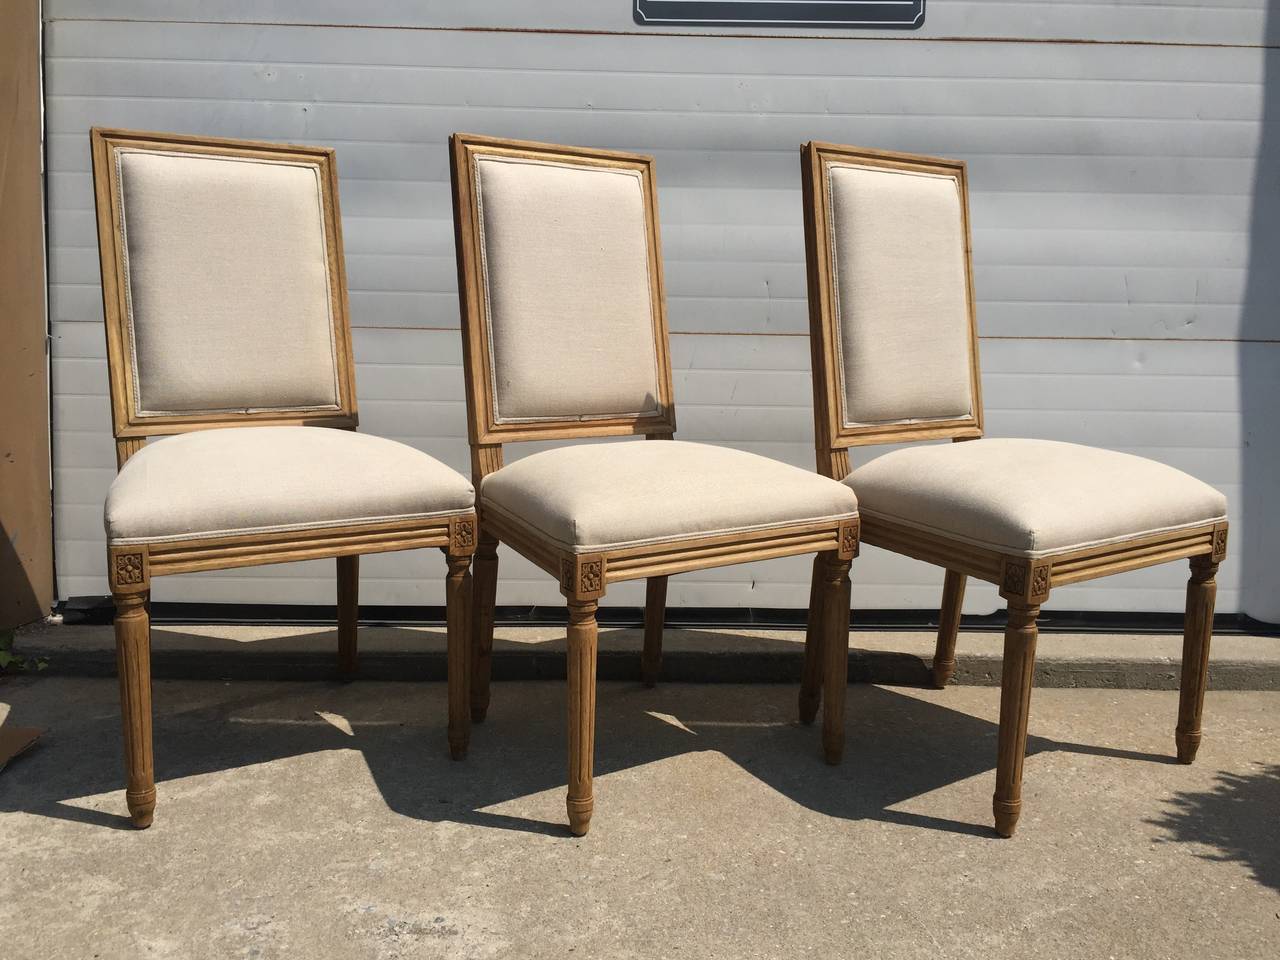 New Square Back French Side Chairs in Belgium Linen In Excellent Condition For Sale In Southampton, NY